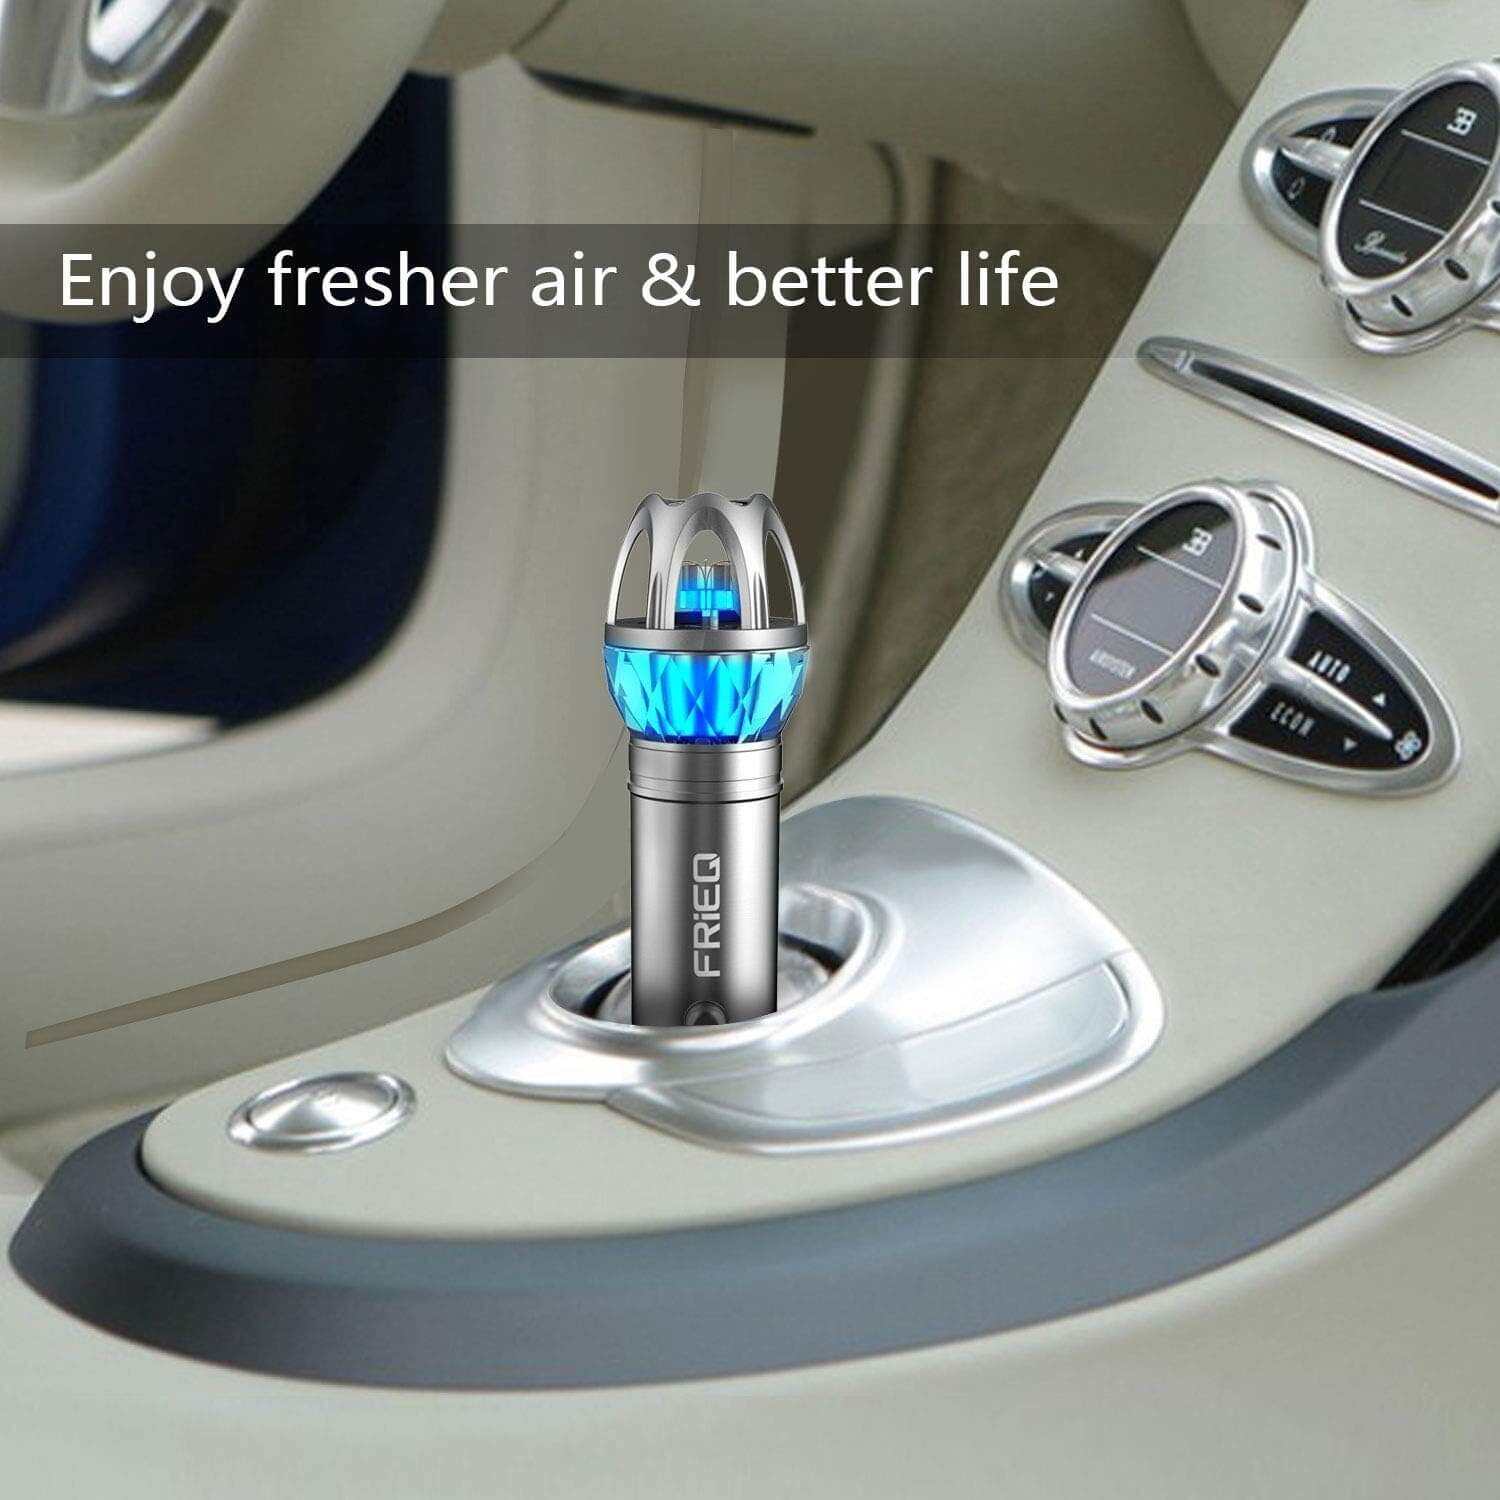 FRiEQ Car Air Purifier, Car Air Freshener and Ionic Air Purifier | Remove Dust, Pollen, Smoke and Bad Odors - Available for Your Auto or RV - Enjoy fresher air & better life